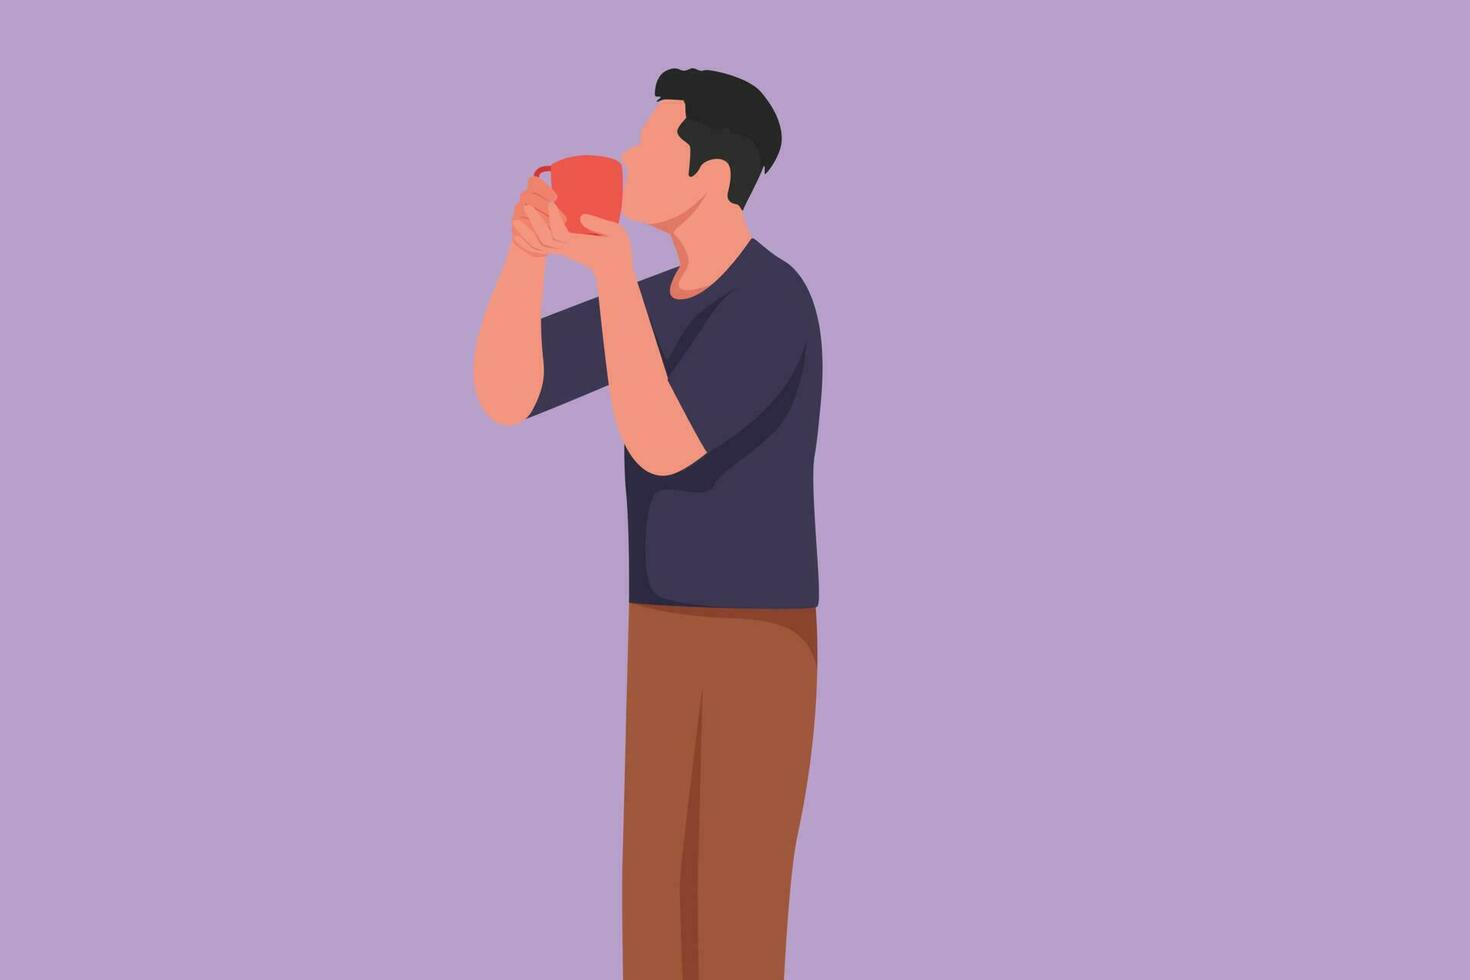 Cartoon flat style drawing young man standing and kissing cup in happy mood. Product photo session with a model to introduce latest beverage brand. Success business. Graphic design vector illustration